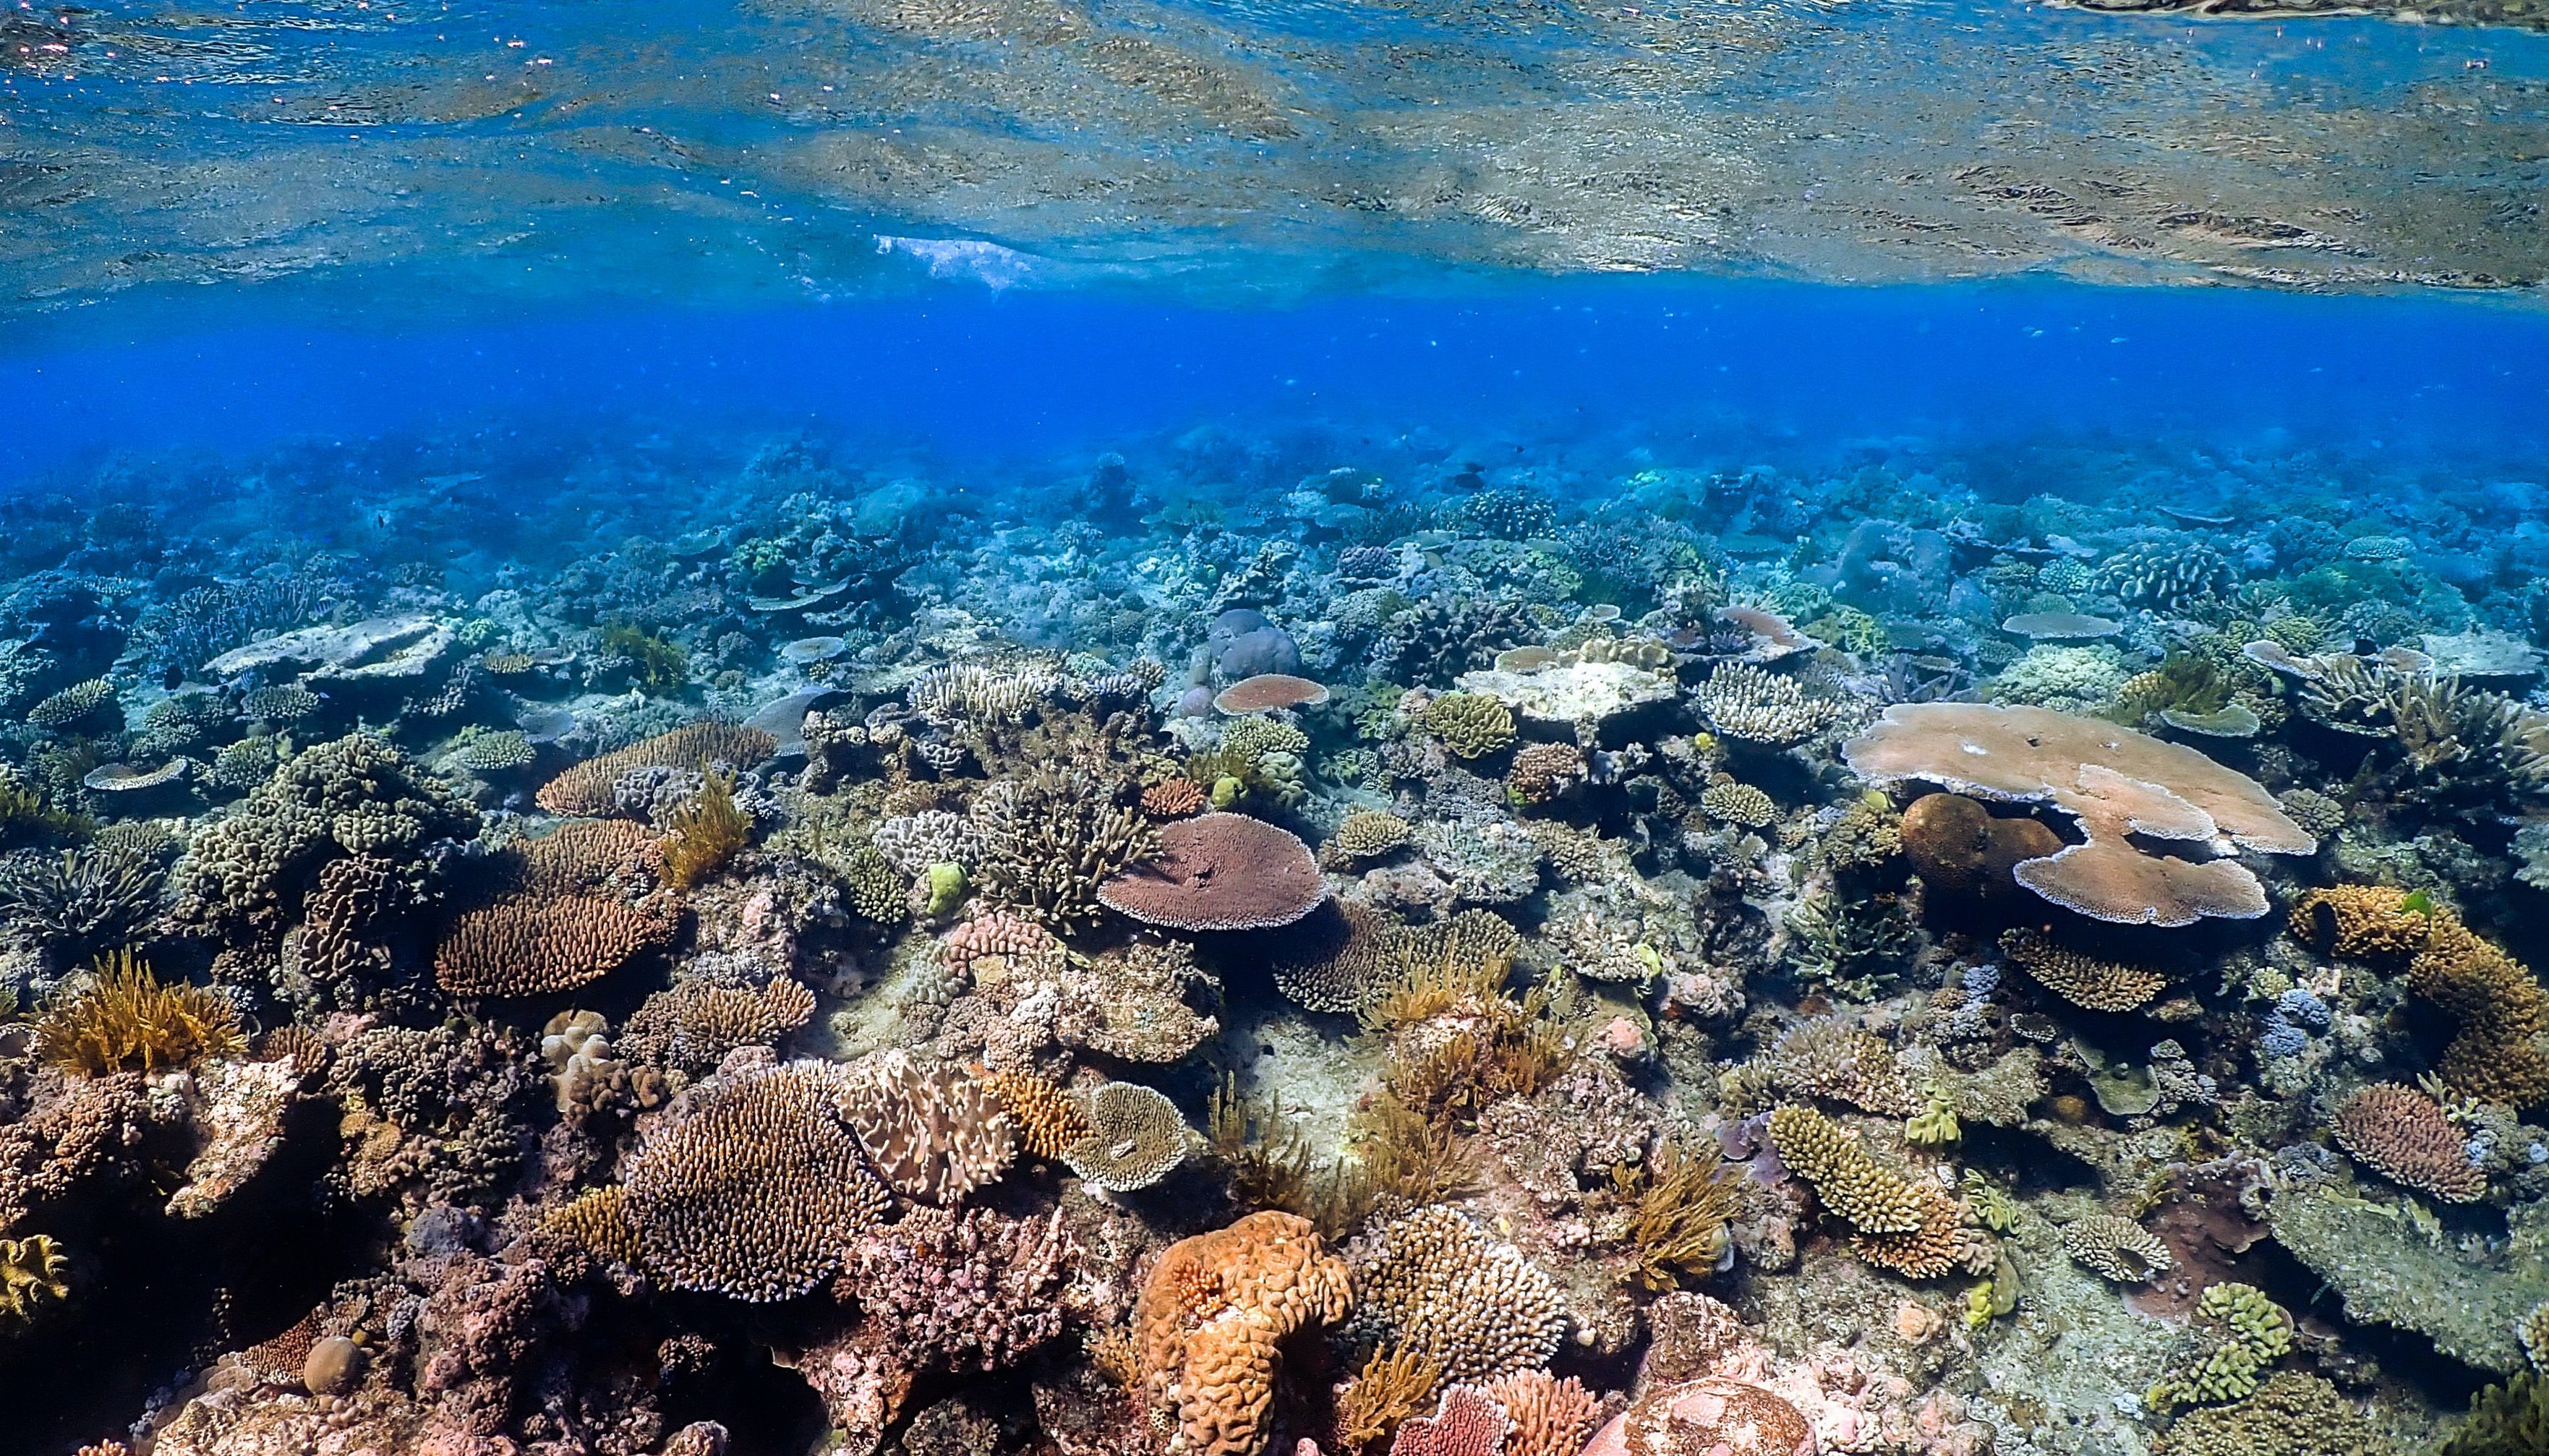 Read Stopping Scarborough, saving the reef by ACF